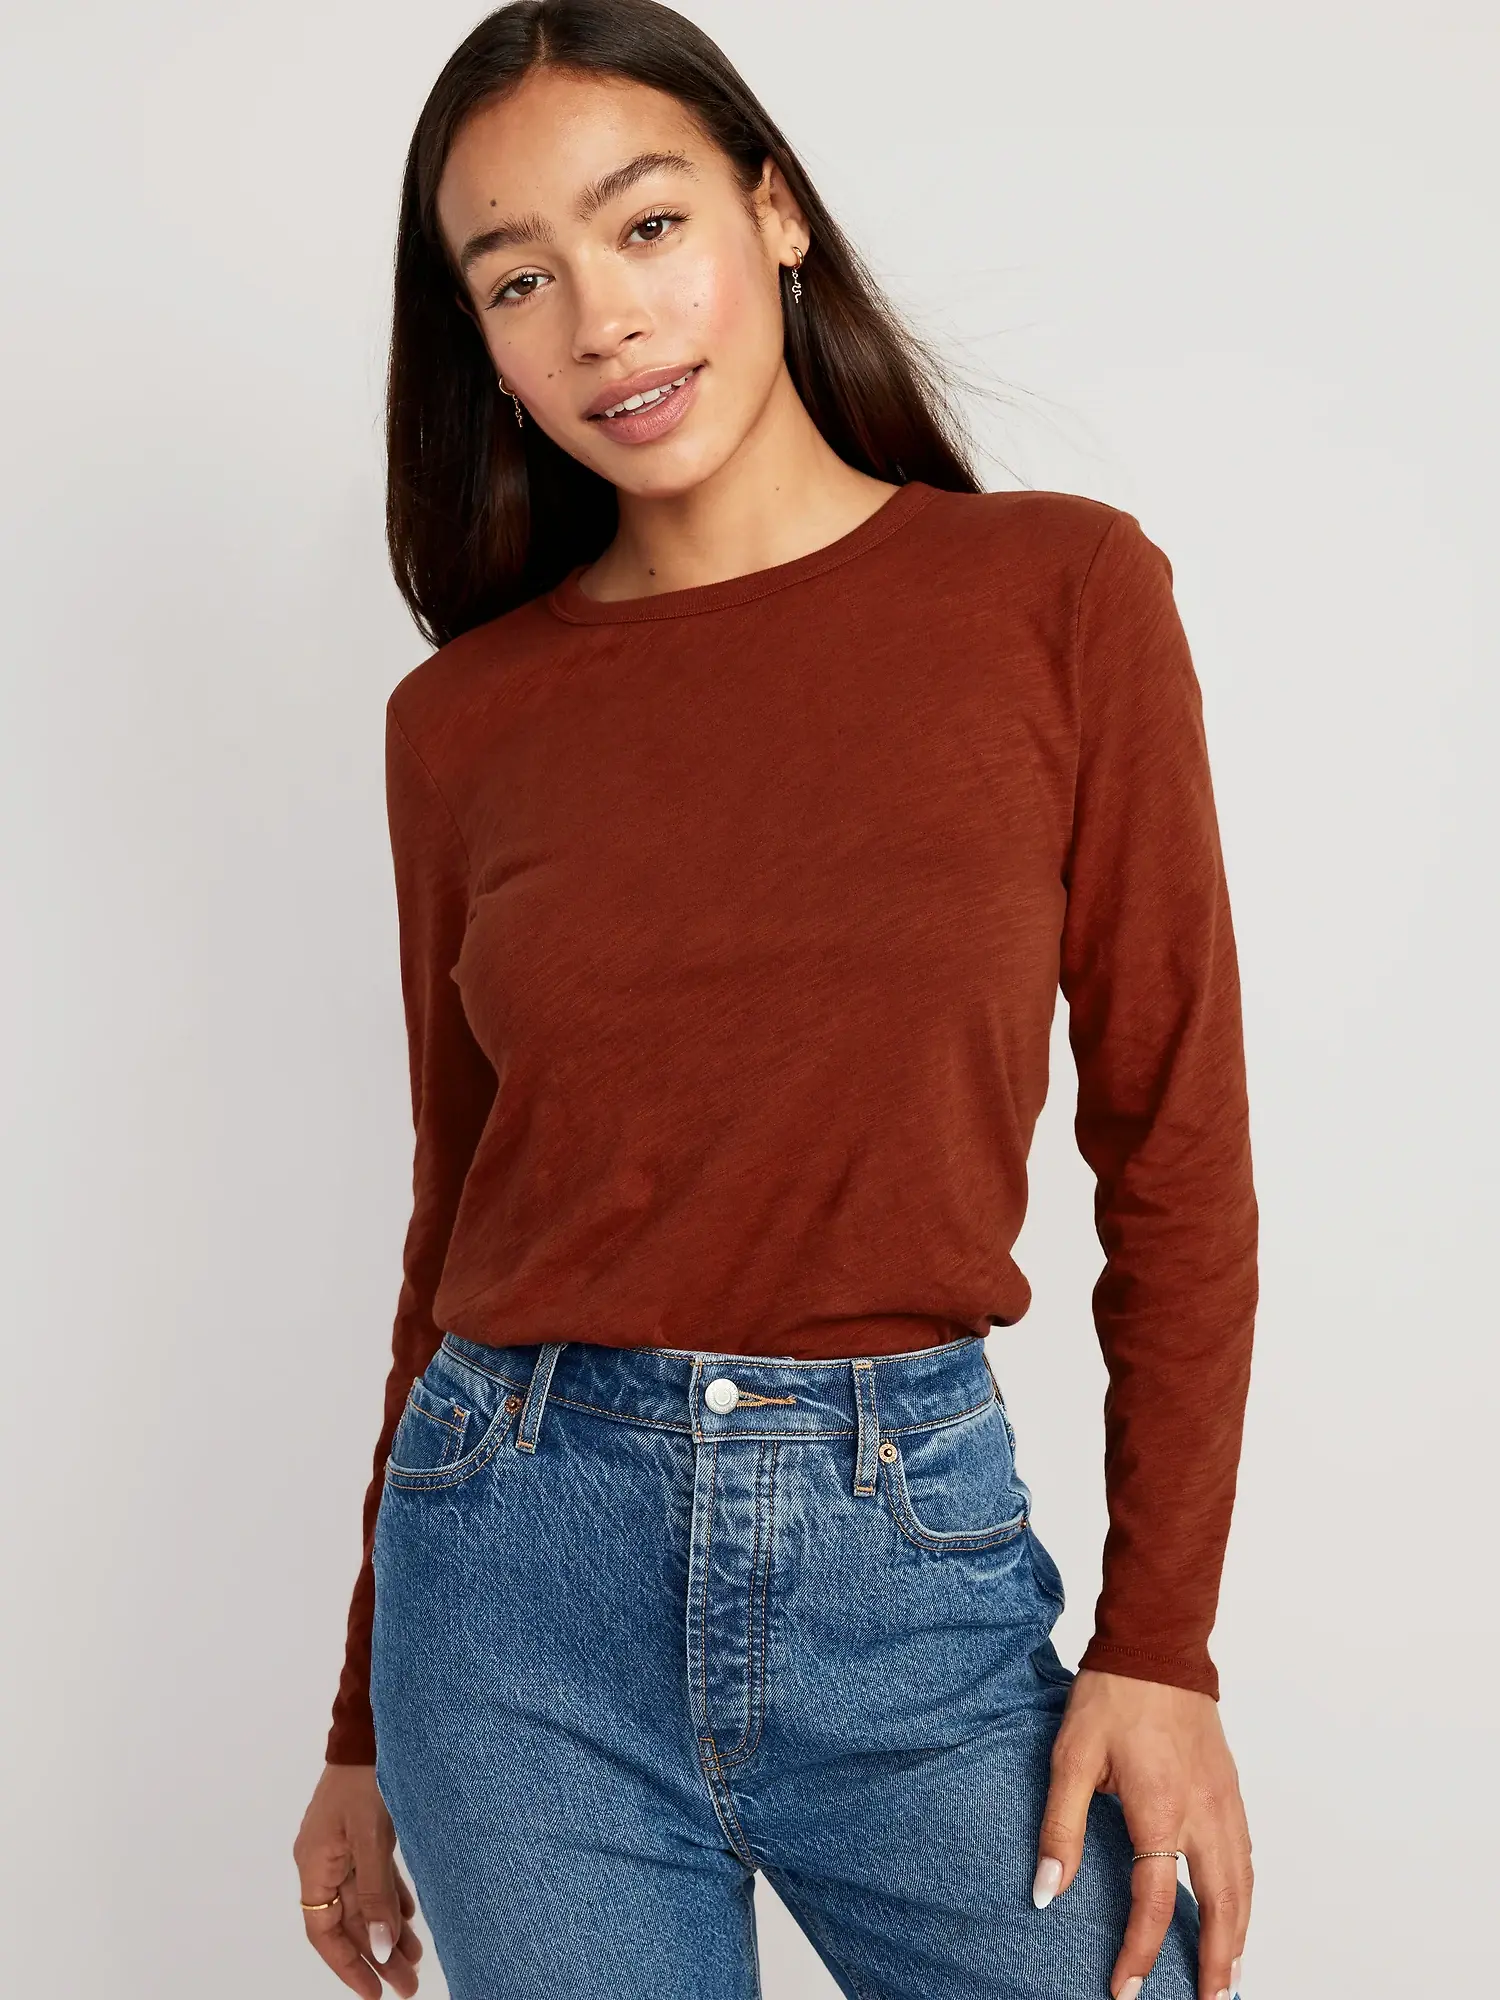 Old Navy EveryWear Long-Sleeve T-Shirt for Women brown. 1